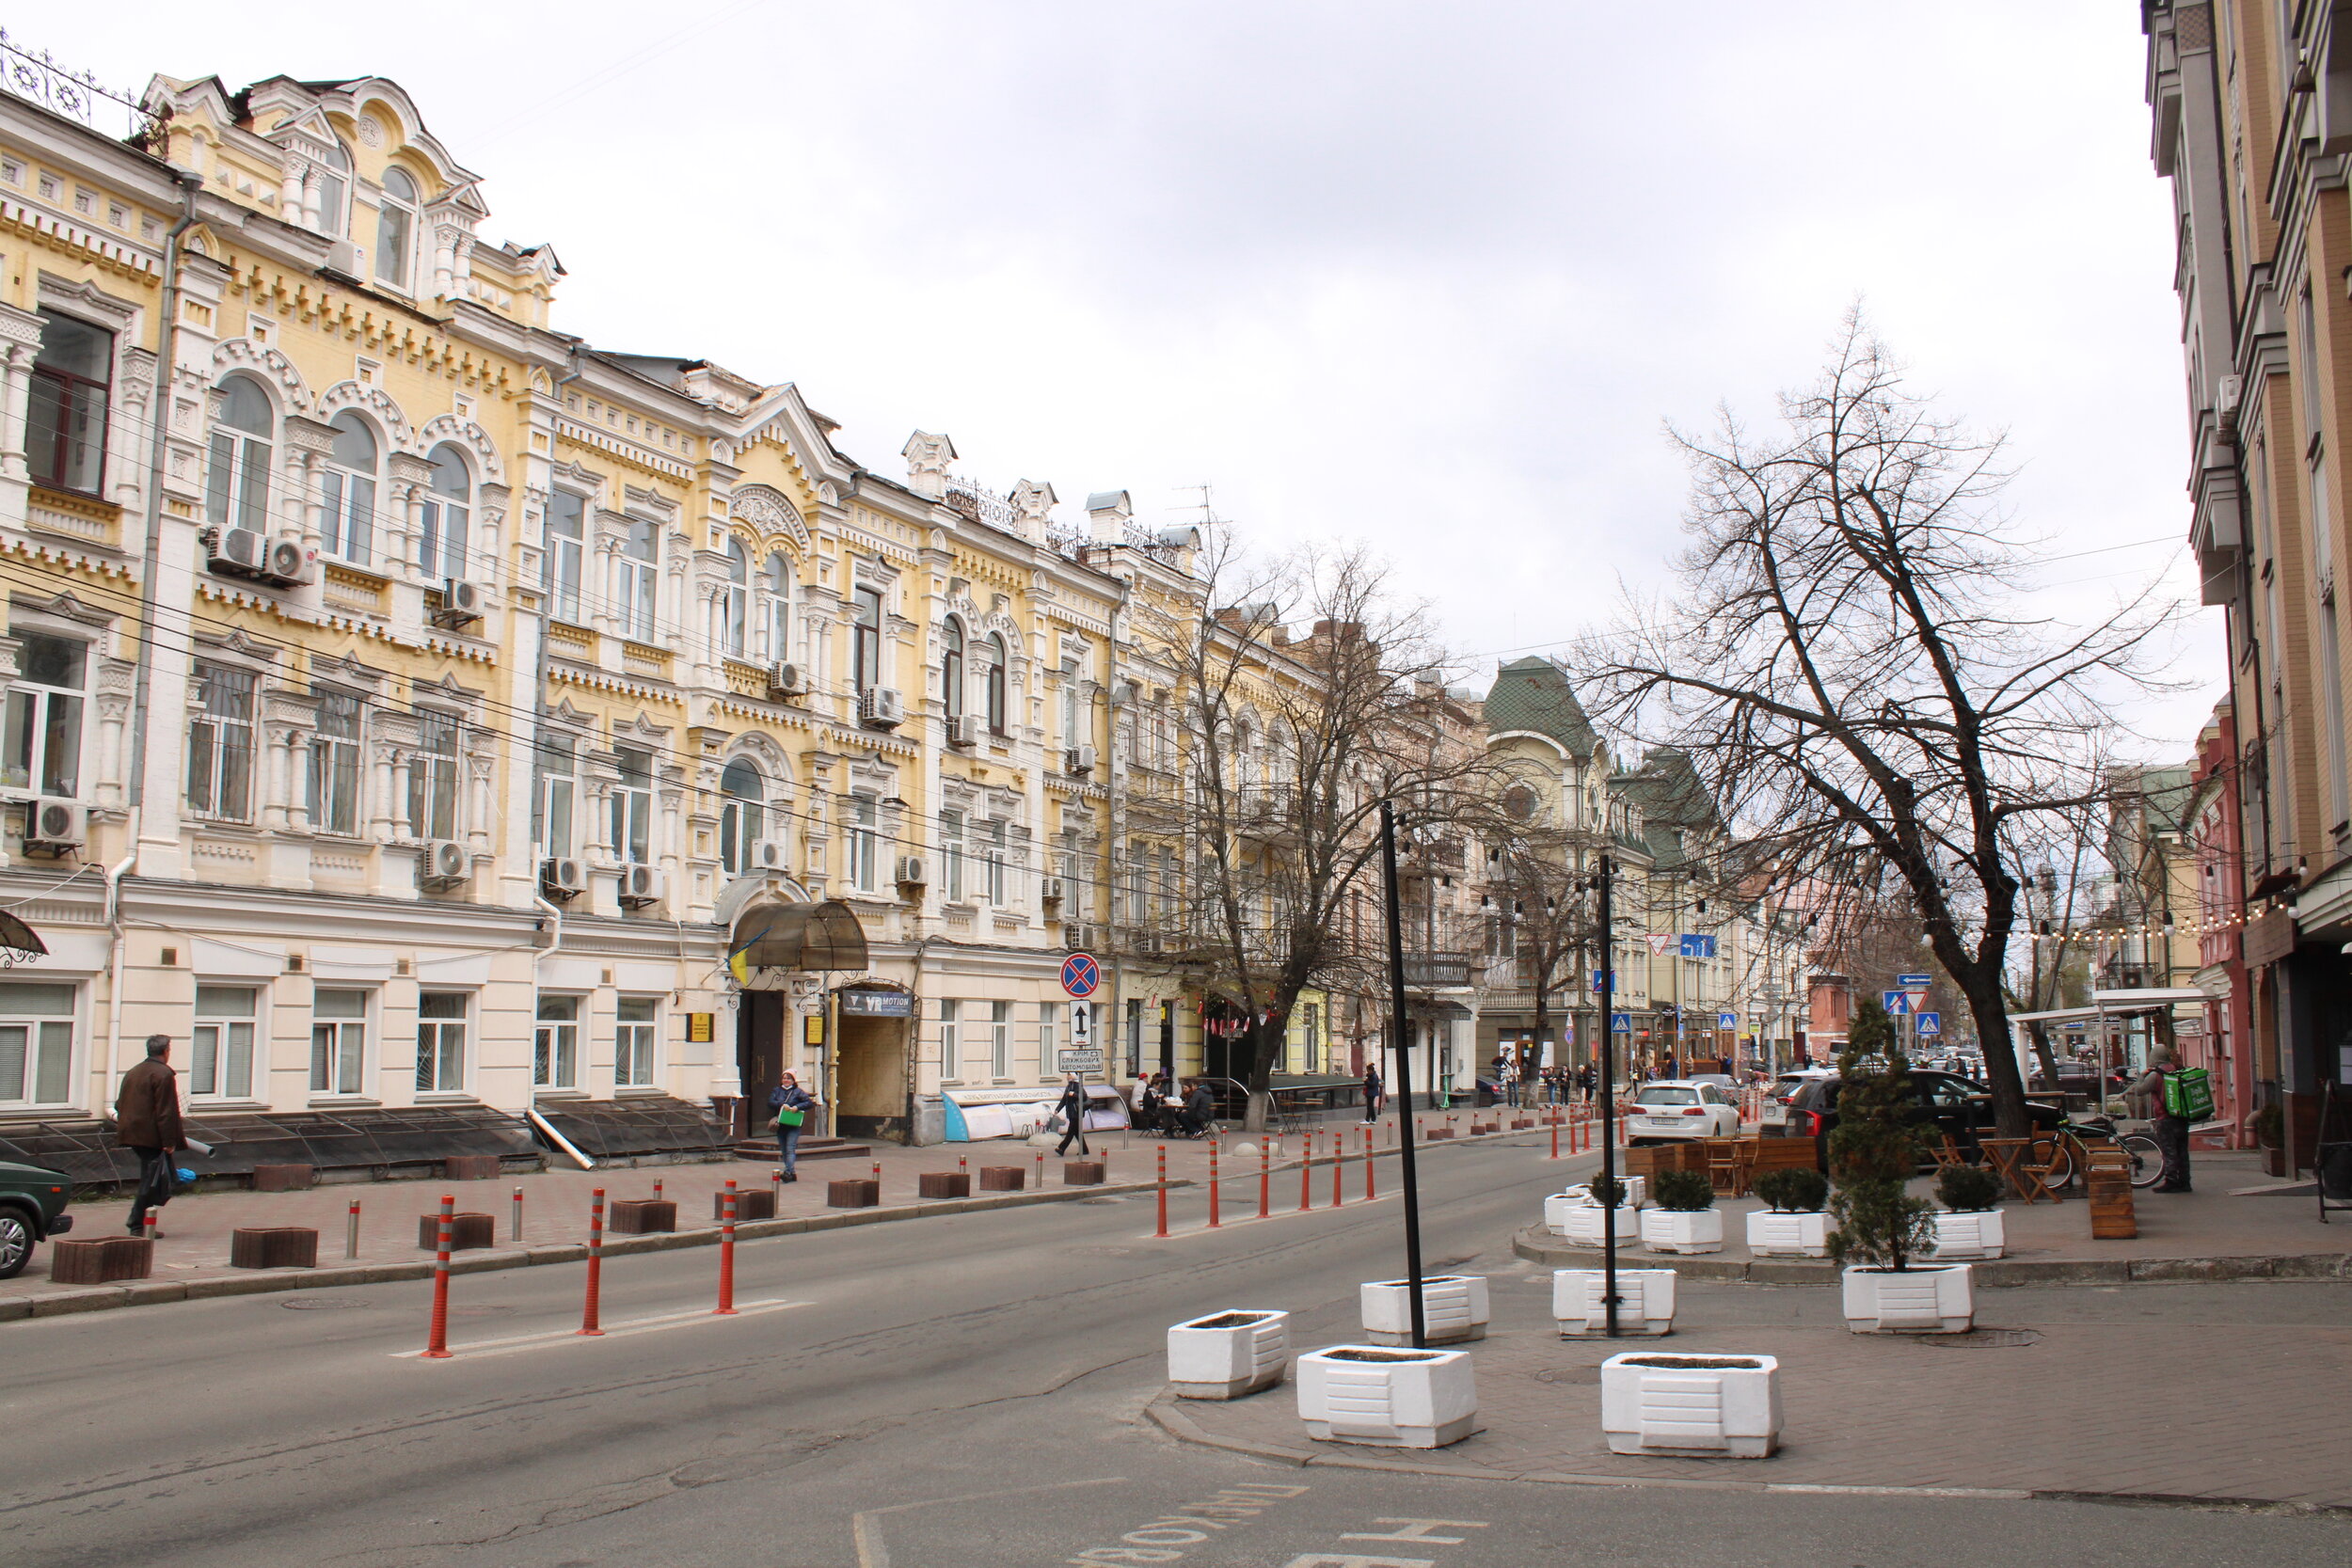   KYIV, Ukraine. April 19th, 2021. PICTURED:  A boulevard in the oldest neighborhood in Kyiv, lined with colored-brick buildings and chestnut trees. 